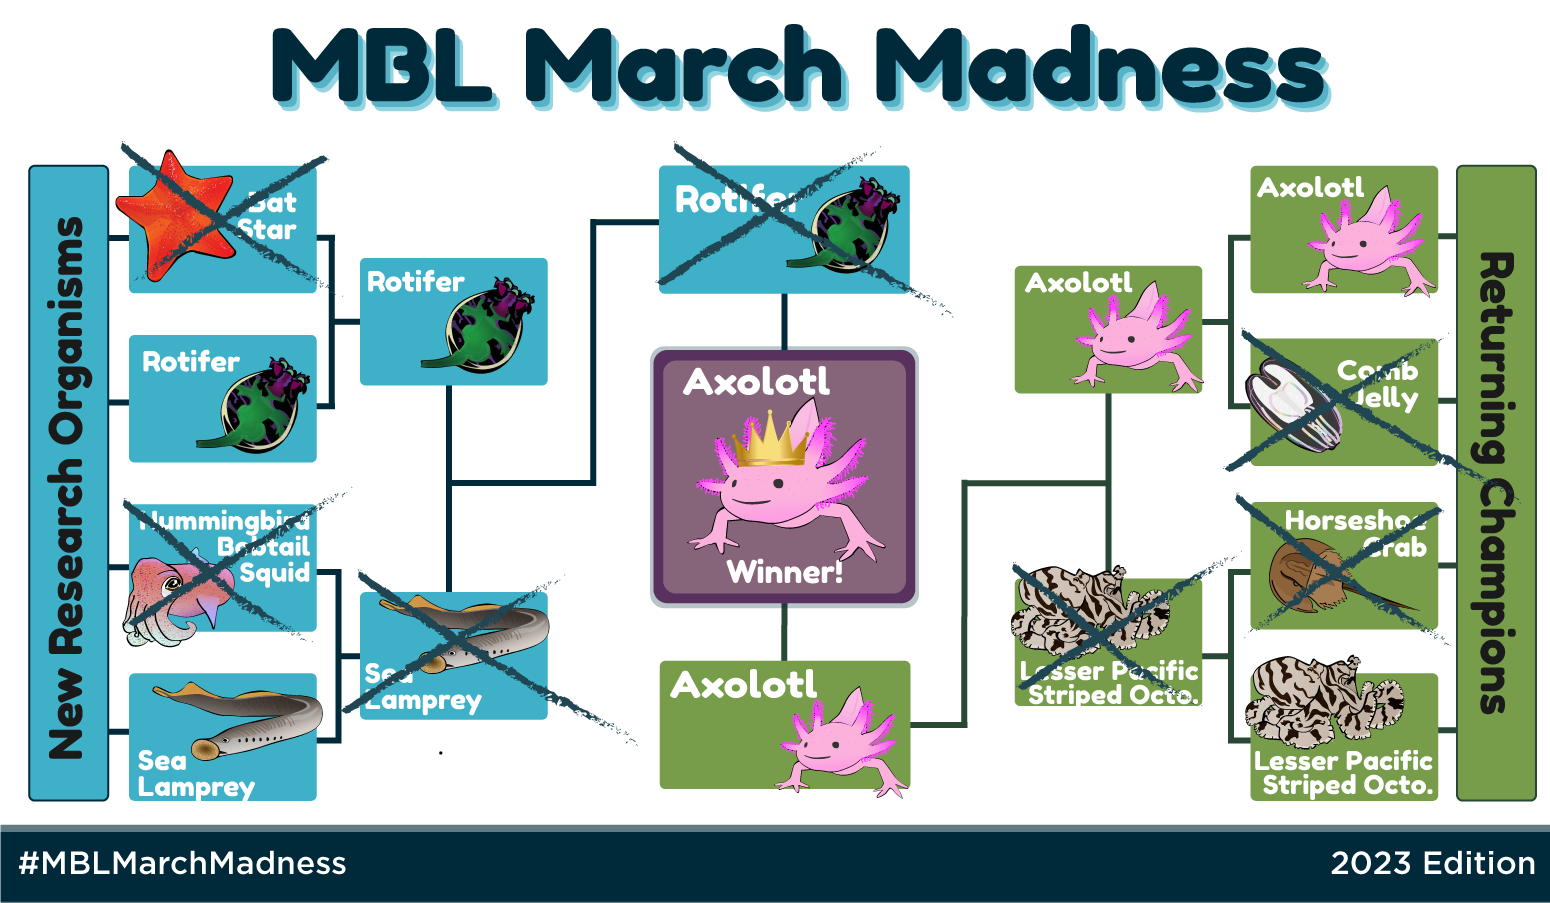 Rotifer put up a good fight, but with more than 270,000 votes the AXOLOTL is crowned MBL GOAT (Greatest Organism of All Time)!